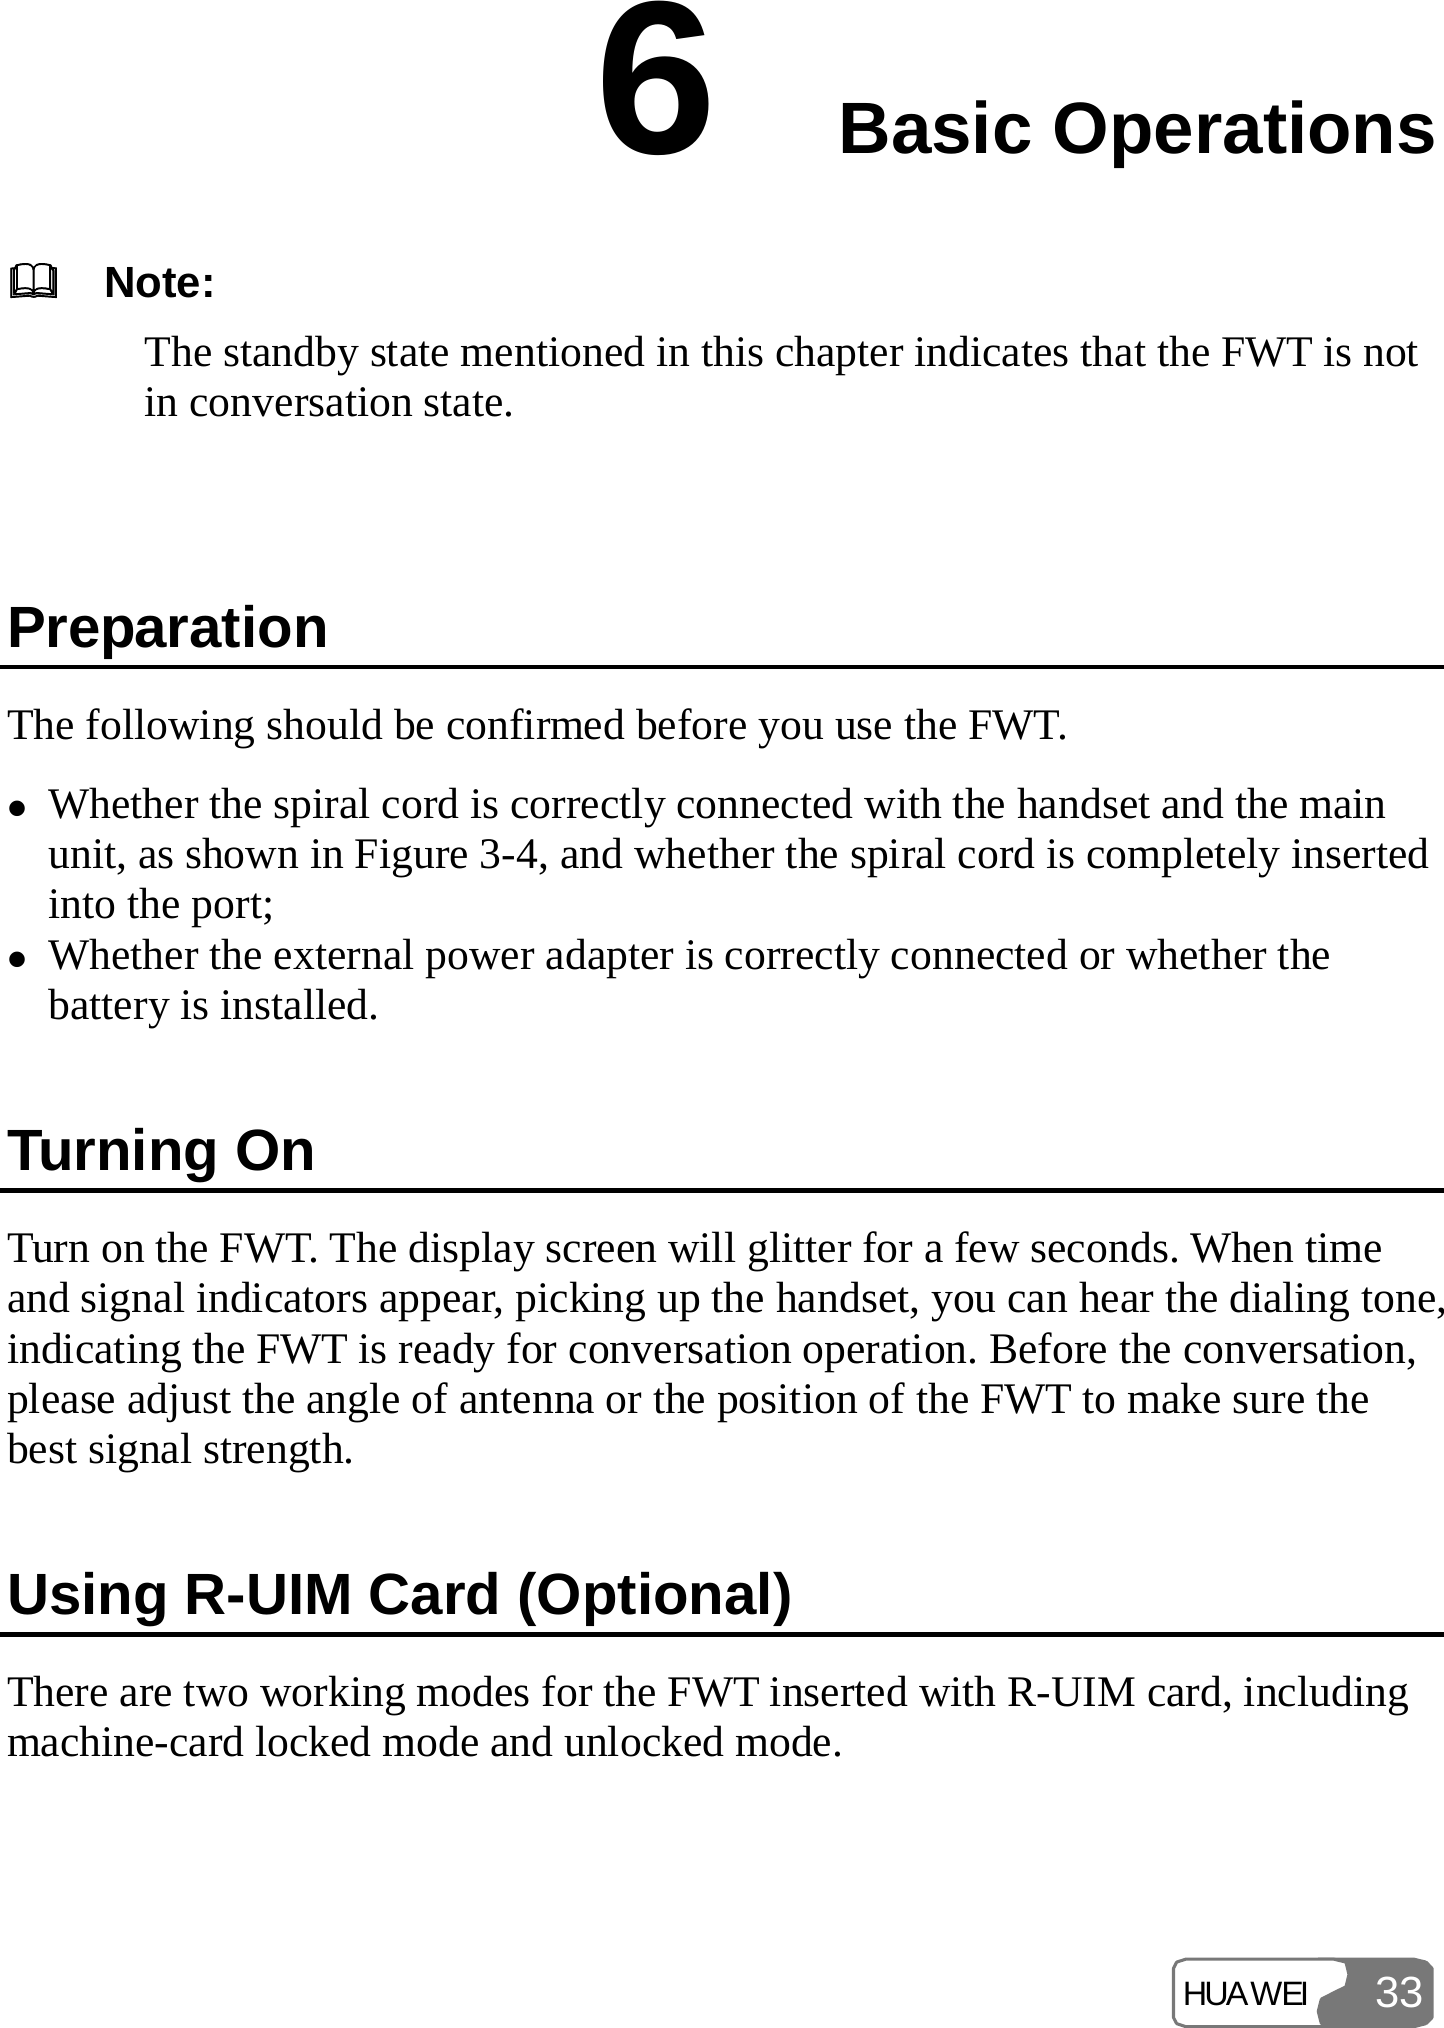 HUAWEI 336  Basic Operations     Note: The standby state mentioned in this chapter indicates that the FWT is not in conversation state.  Preparation The following should be confirmed before you use the FWT. z Whether the spiral cord is correctly connected with the handset and the main unit, as shown in Figure 3-4, and whether the spiral cord is completely inserted into the port; z Whether the external power adapter is correctly connected or whether the battery is installed. Turning On Turn on the FWT. The display screen will glitter for a few seconds. When time and signal indicators appear, picking up the handset, you can hear the dialing tone, indicating the FWT is ready for conversation operation. Before the conversation, please adjust the angle of antenna or the position of the FWT to make sure the best signal strength. Using R-UIM Card (Optional) There are two working modes for the FWT inserted with R-UIM card, including machine-card locked mode and unlocked mode. 